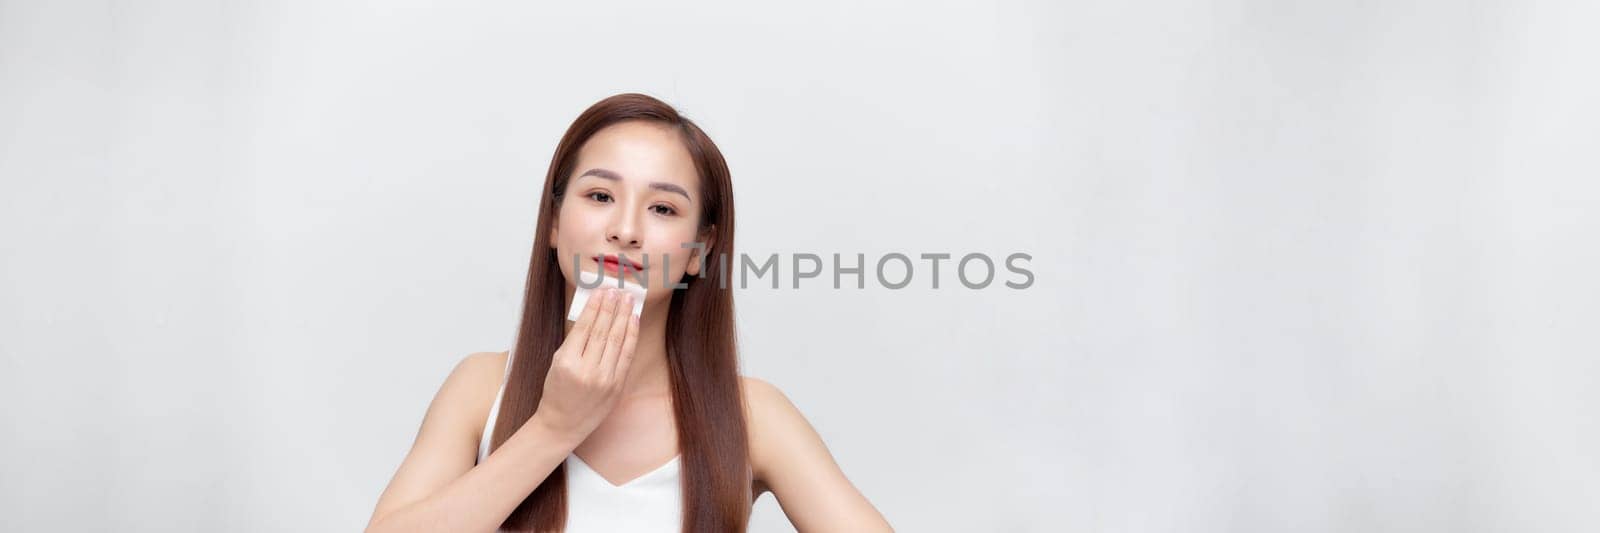 Panorama with woman removing oil from face using blotting papers. 